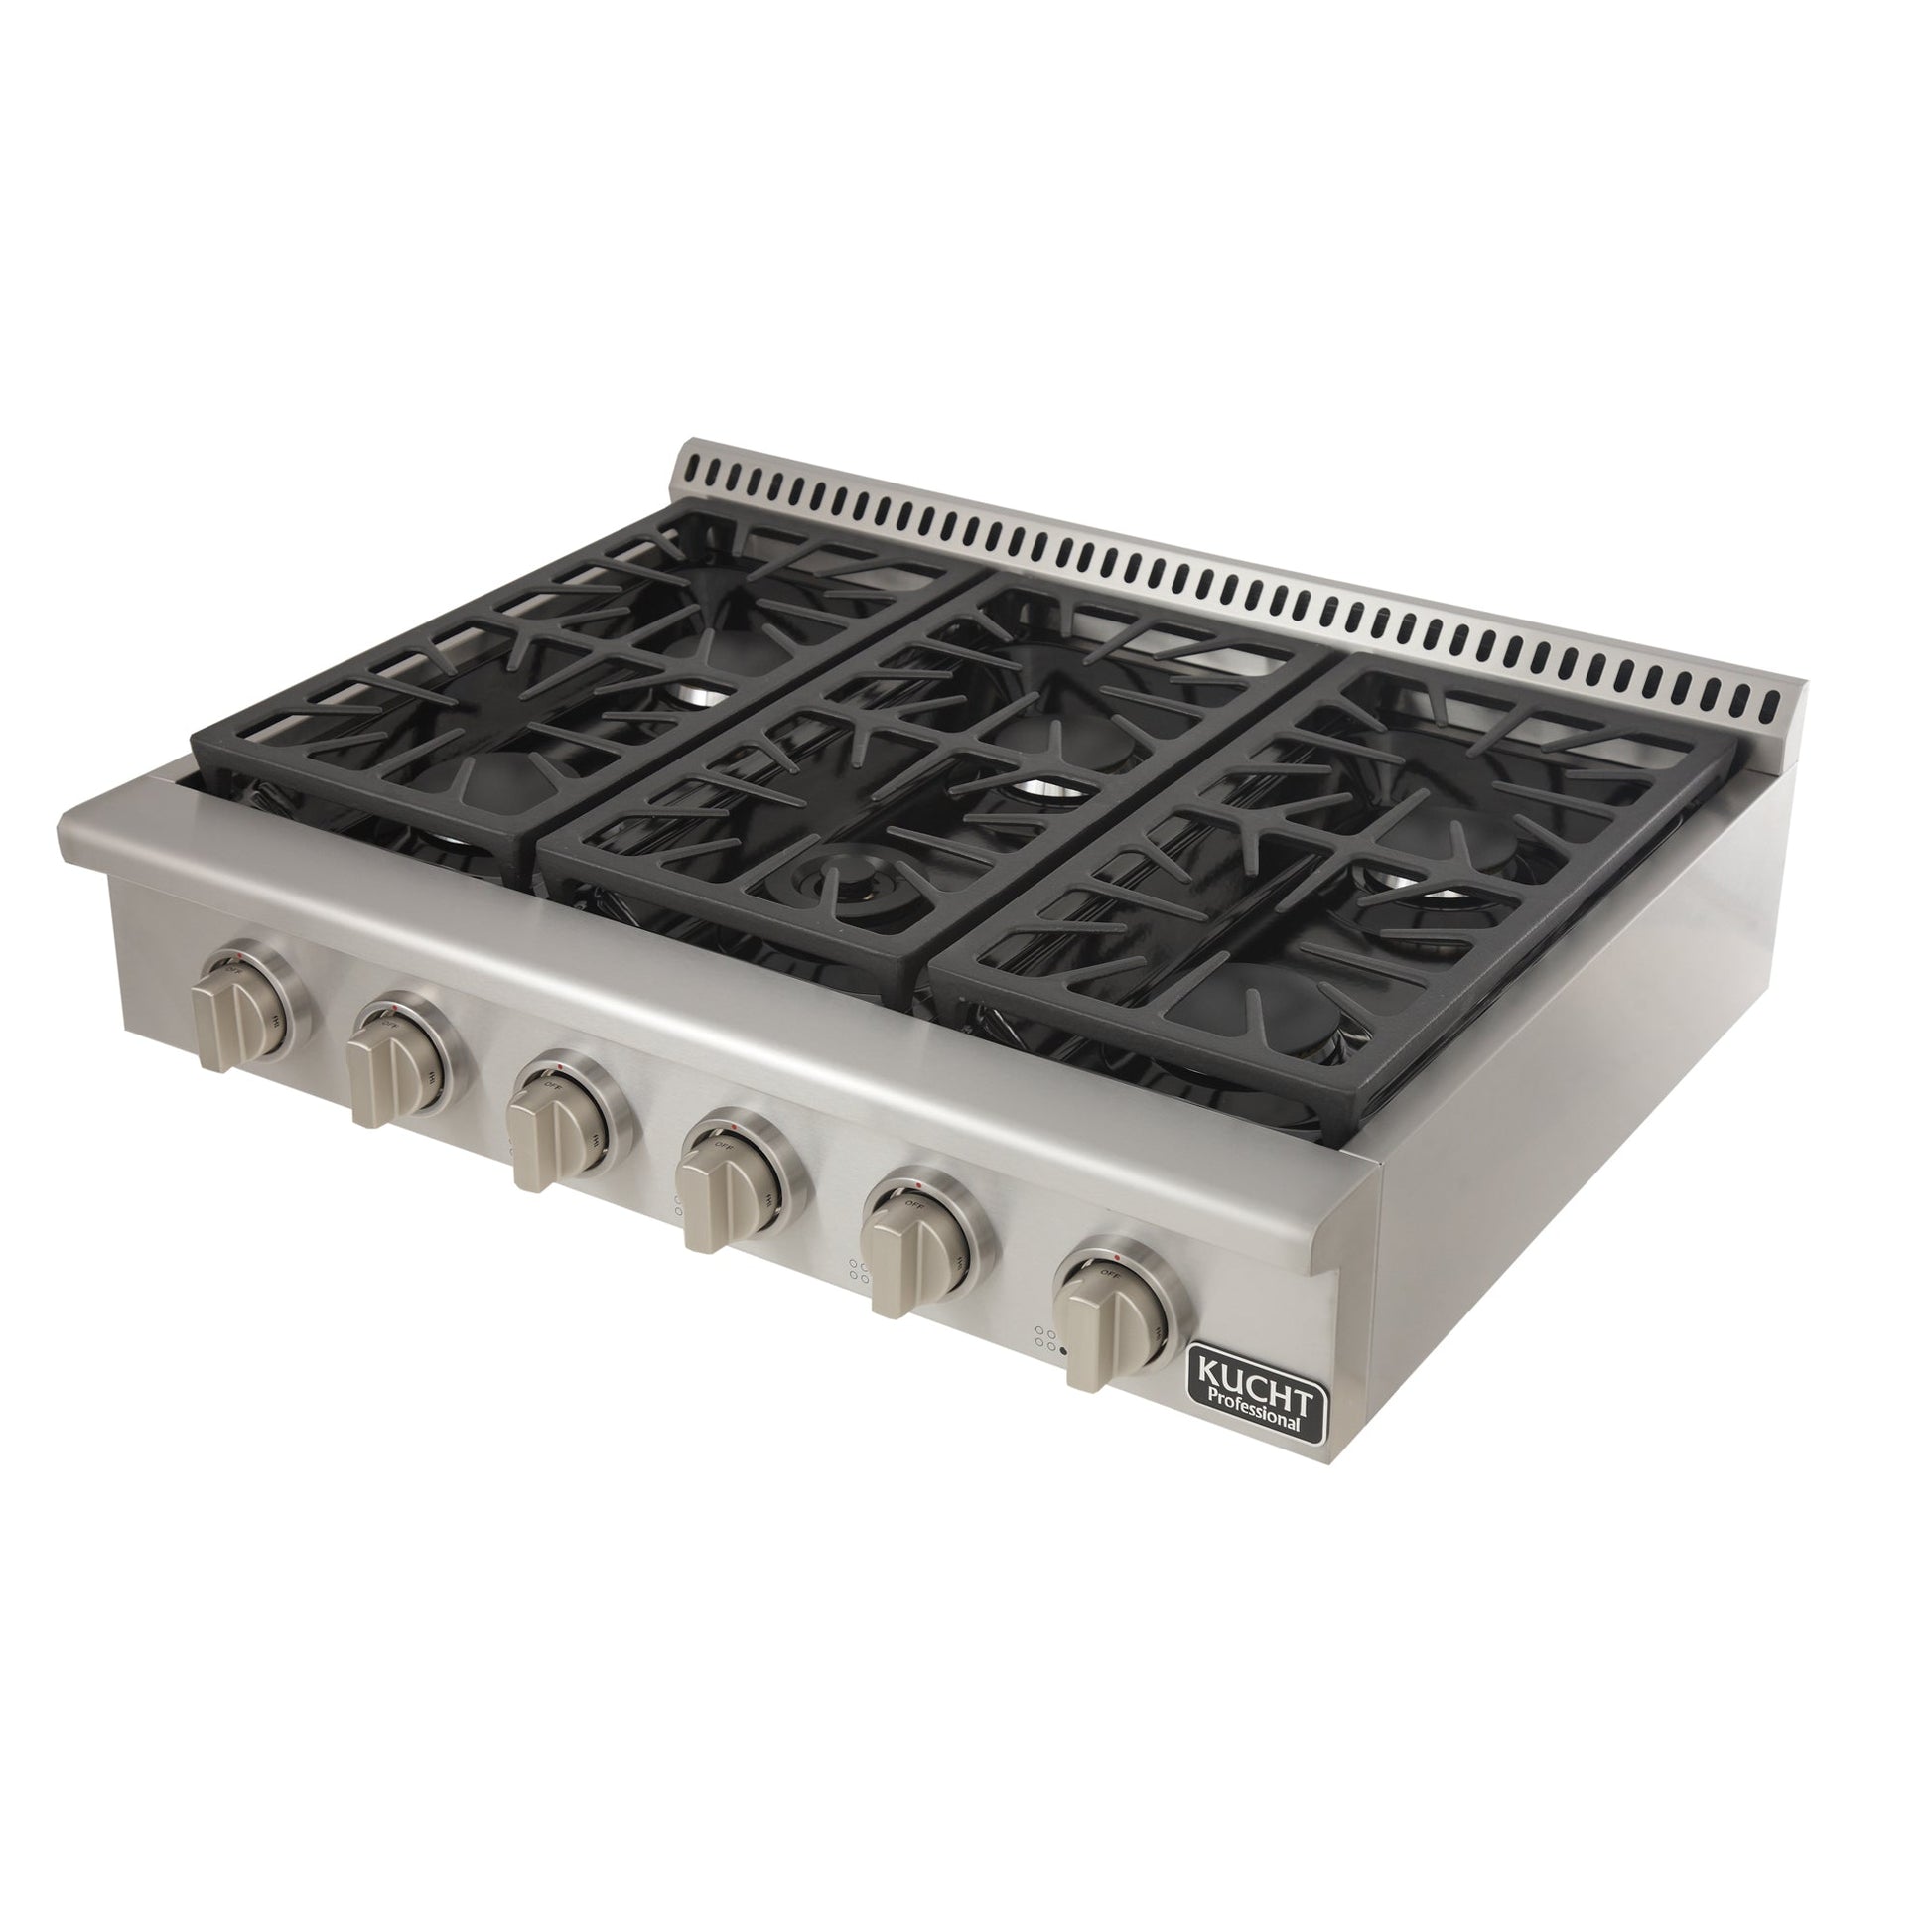 Kucht KRT Series 36" Natural Gas Range-Top With 6 Burners and Classic Silver Knobs